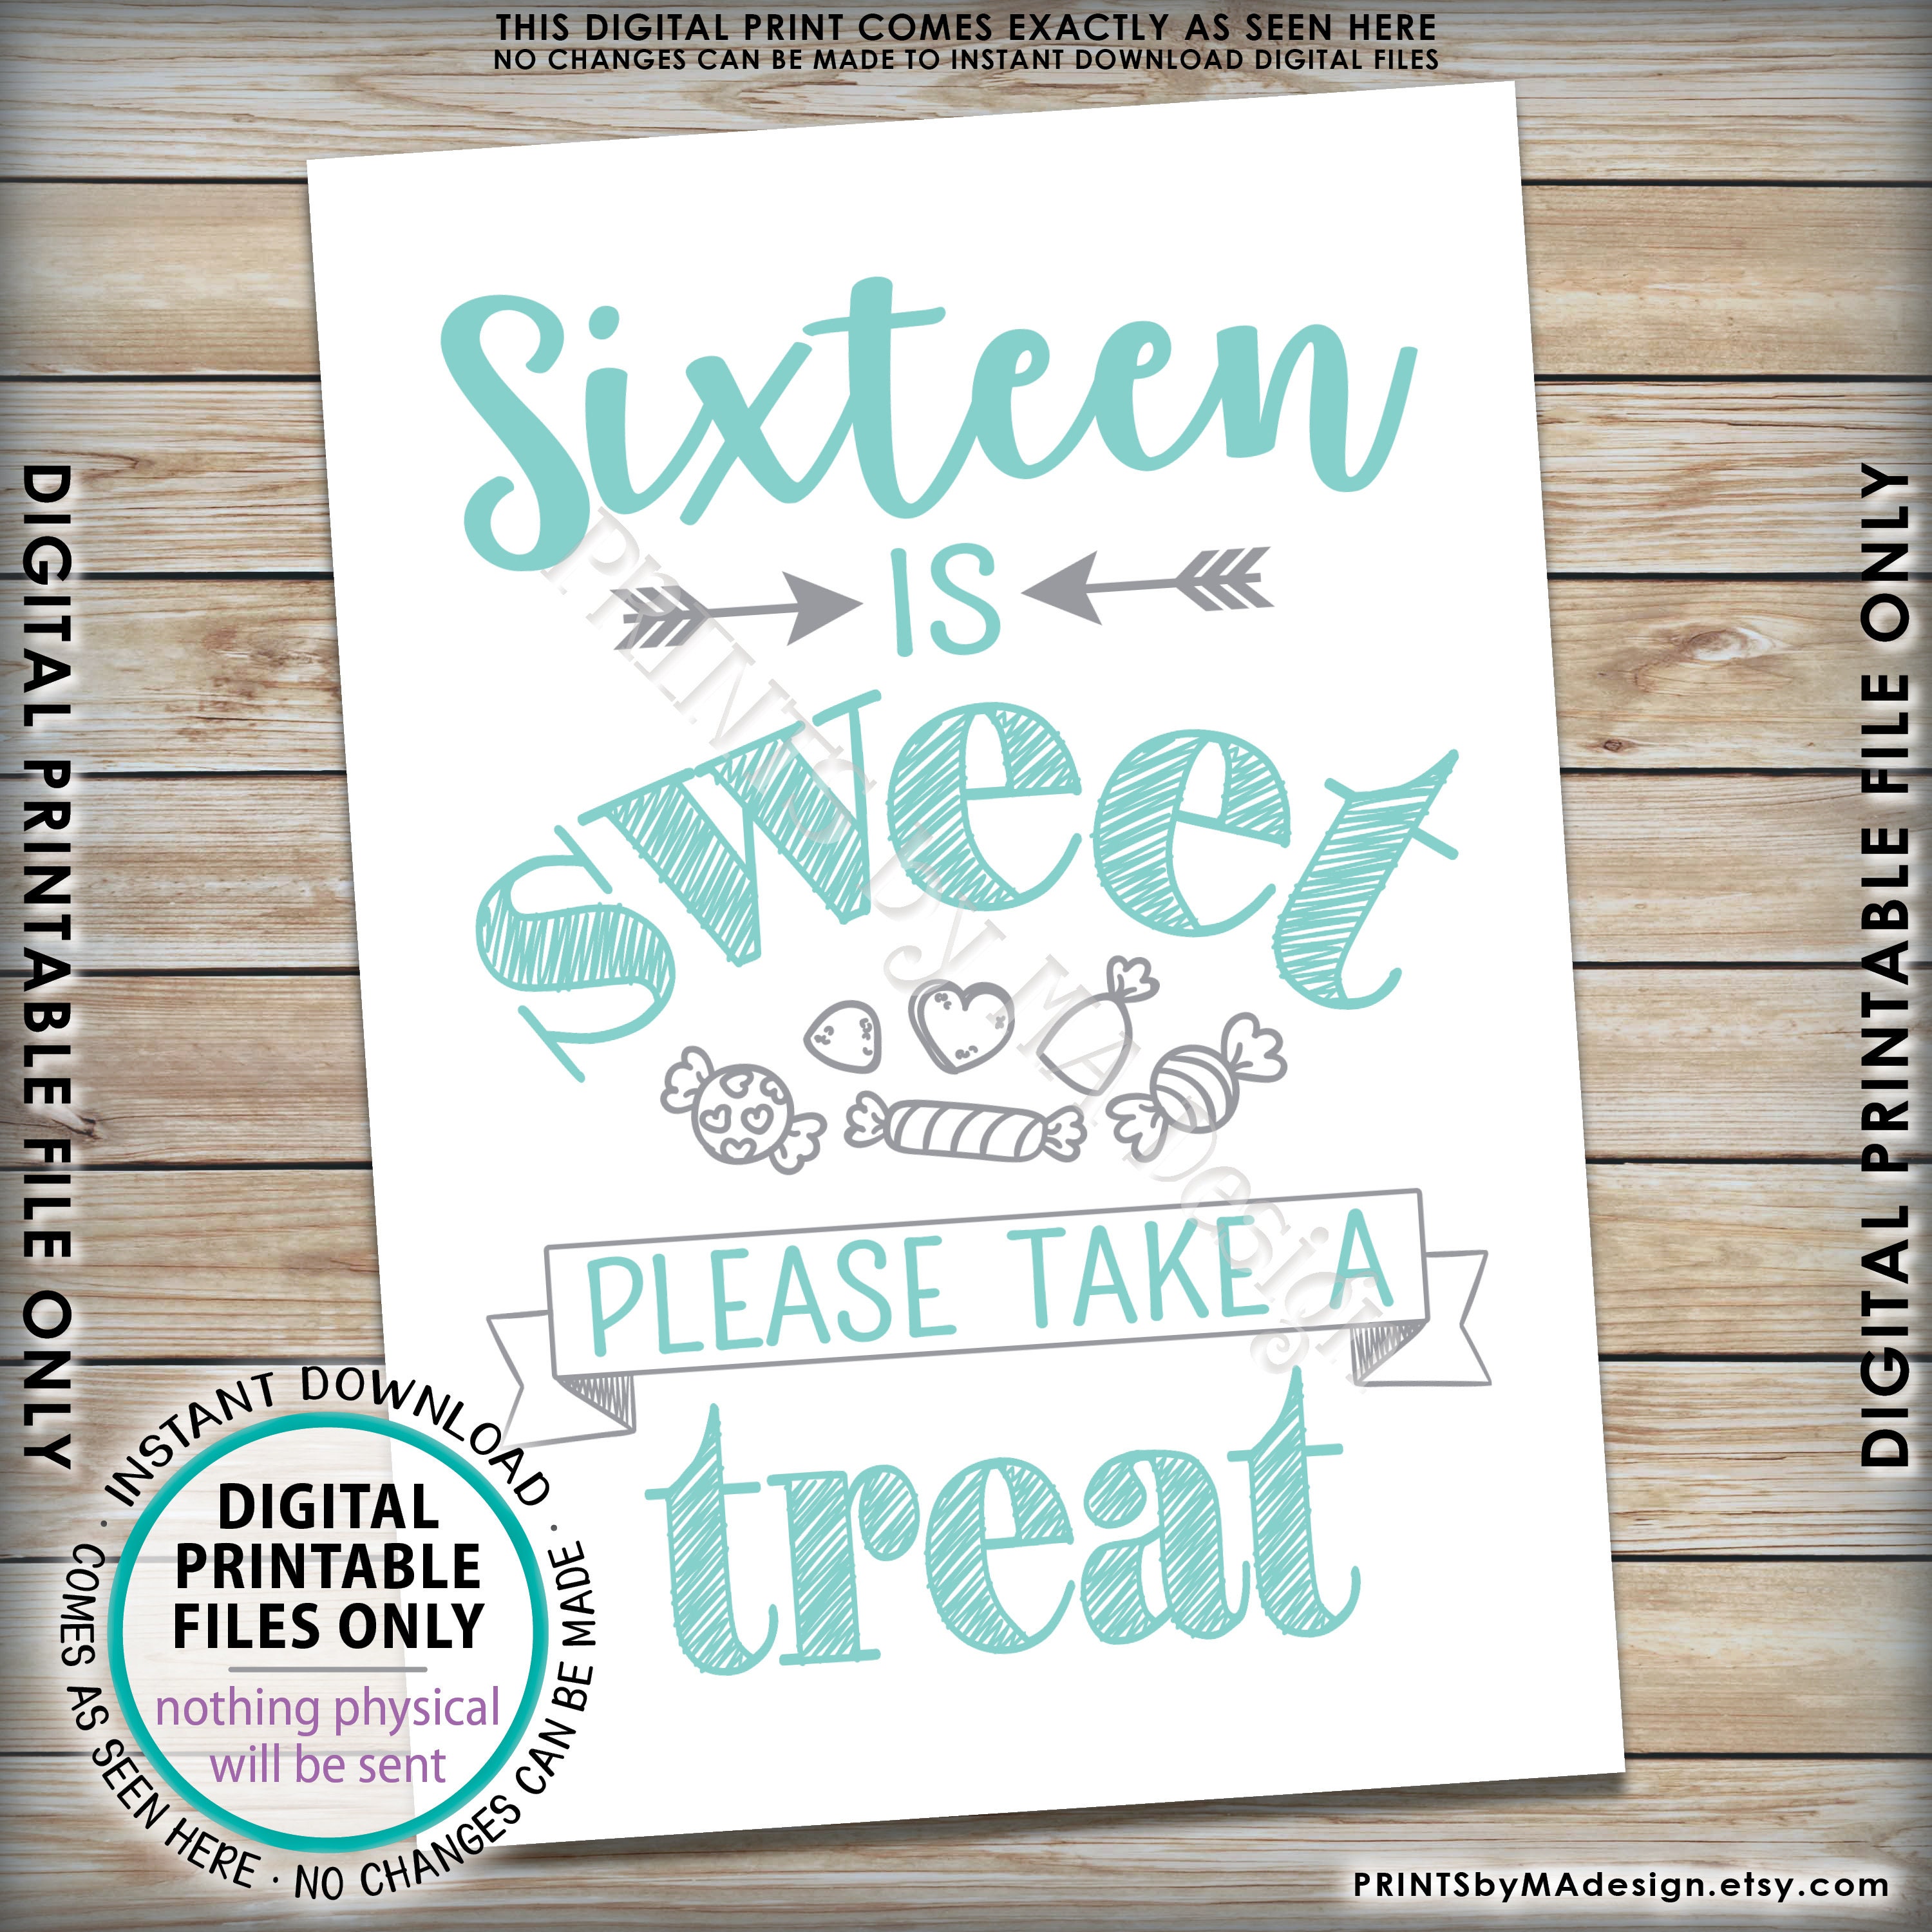 sweet-16-sign-sixteen-is-sweet-please-take-a-treat-candy-bar-etsy